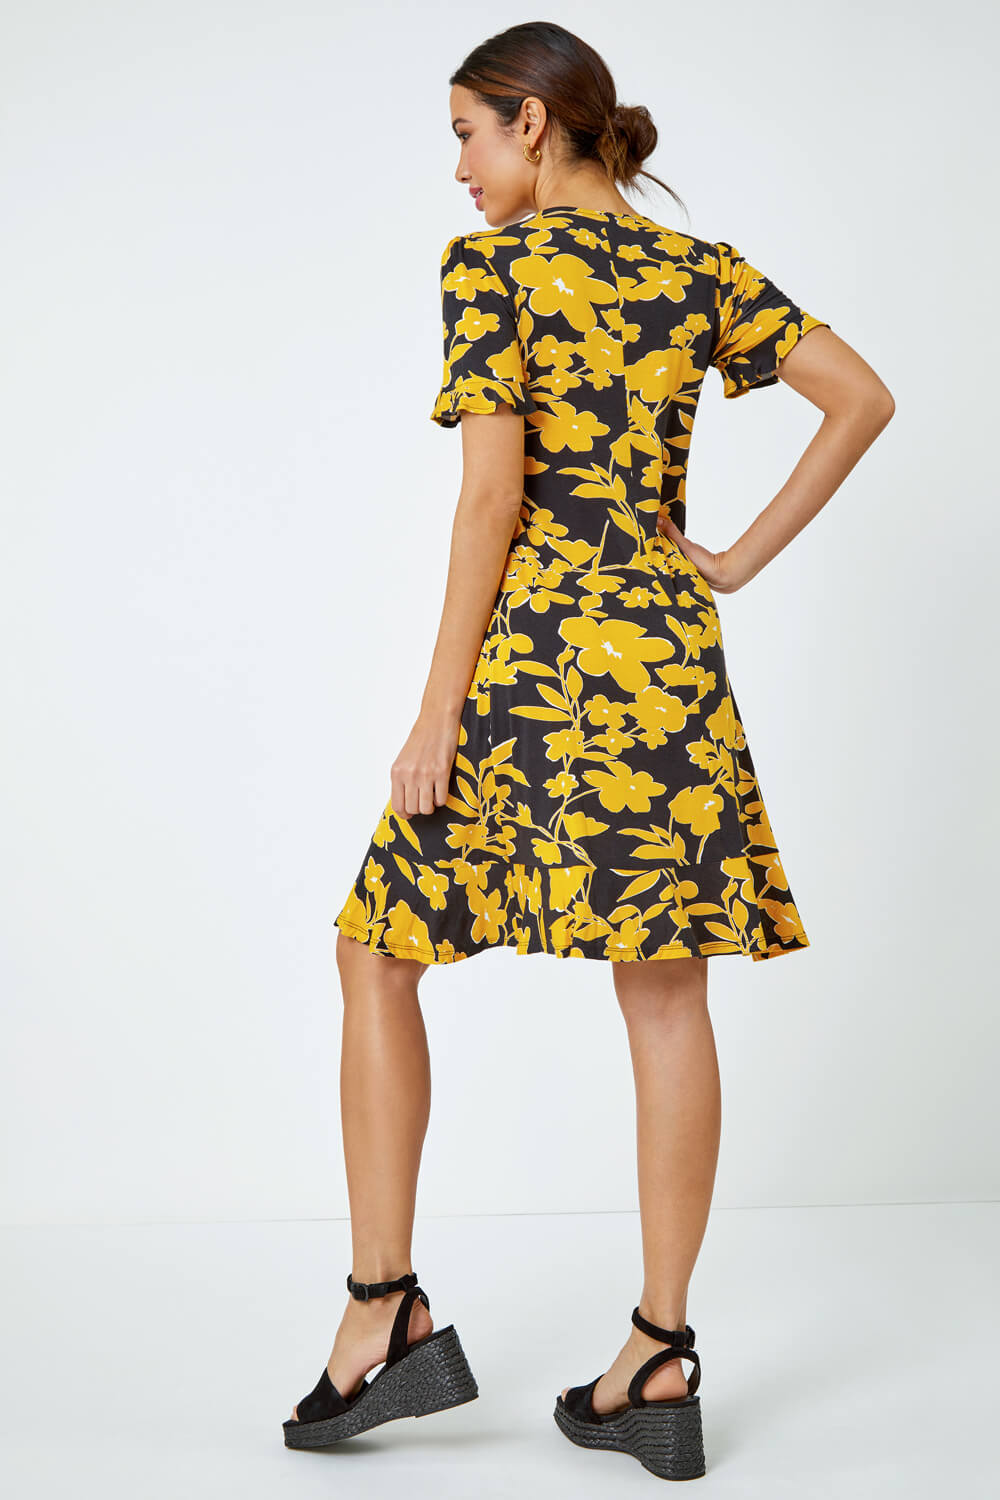 Yellow Floral Frill Hem Stretch Dress, Image 3 of 5